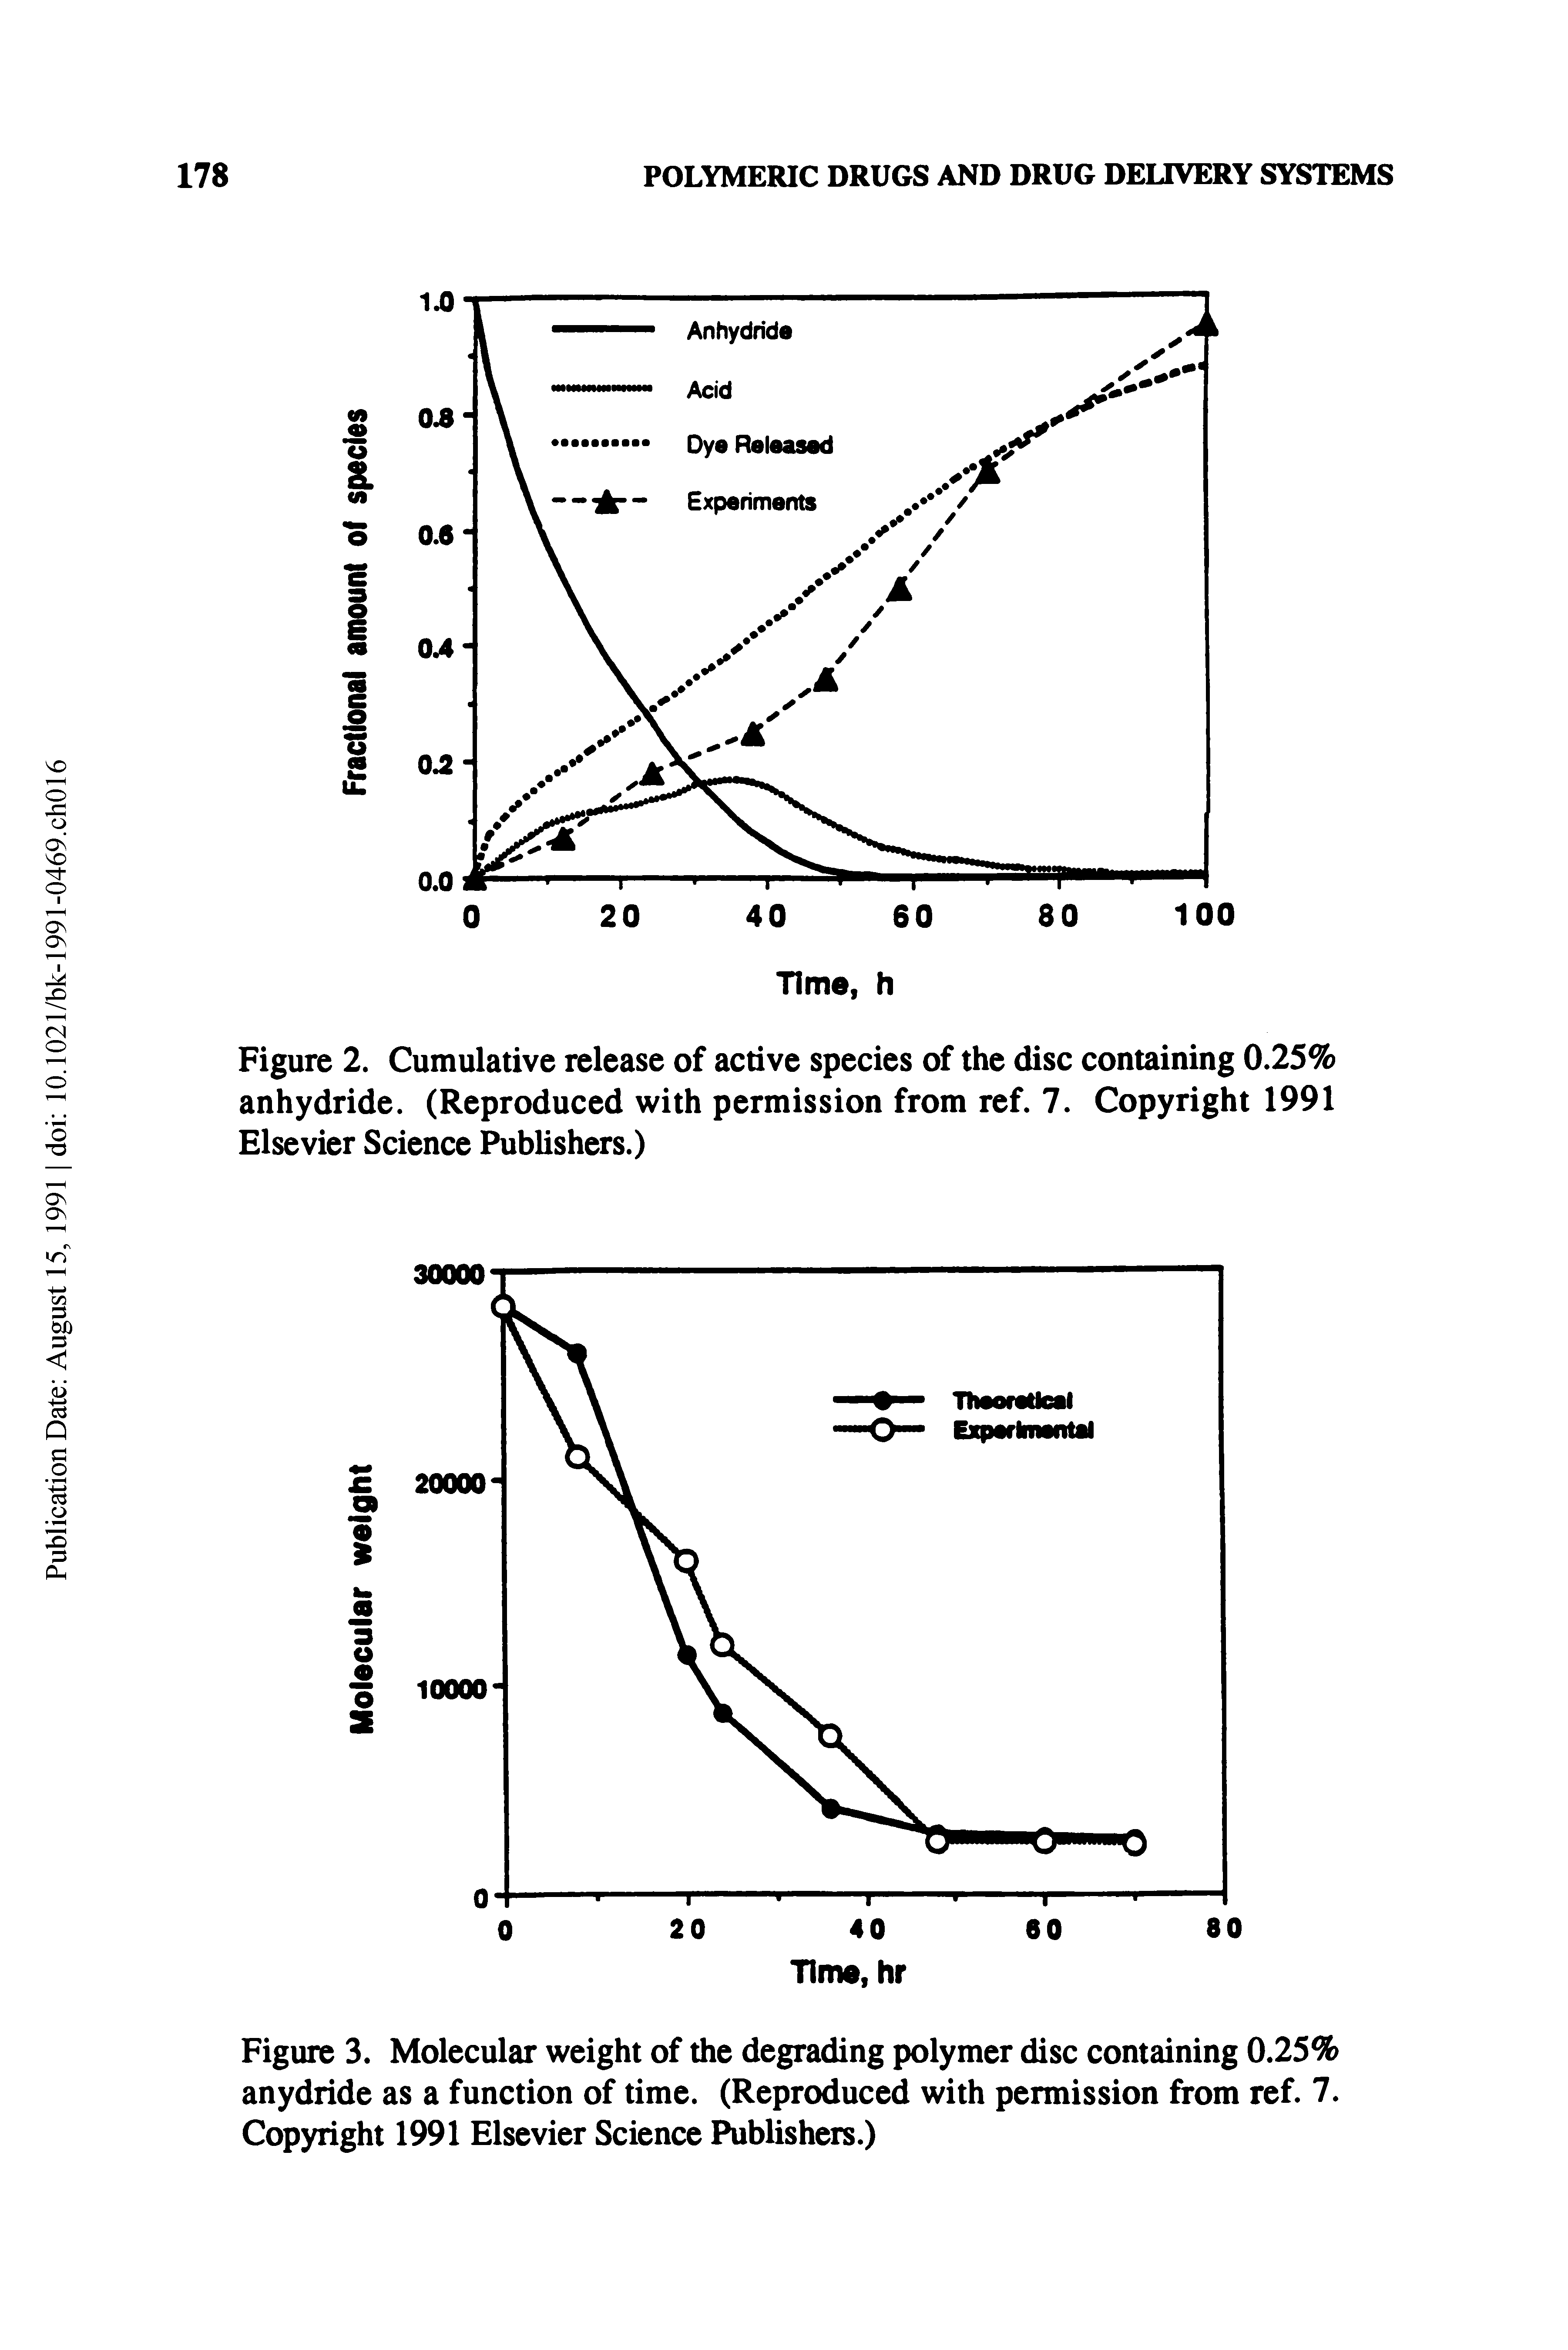 Figure 3. Molecular weight of the degrading polymer disc containing 0.25% anydride as a function of time. (Reproduced with permission from ref. 7. Copyright 1991 Elsevier Science Publishers.)...